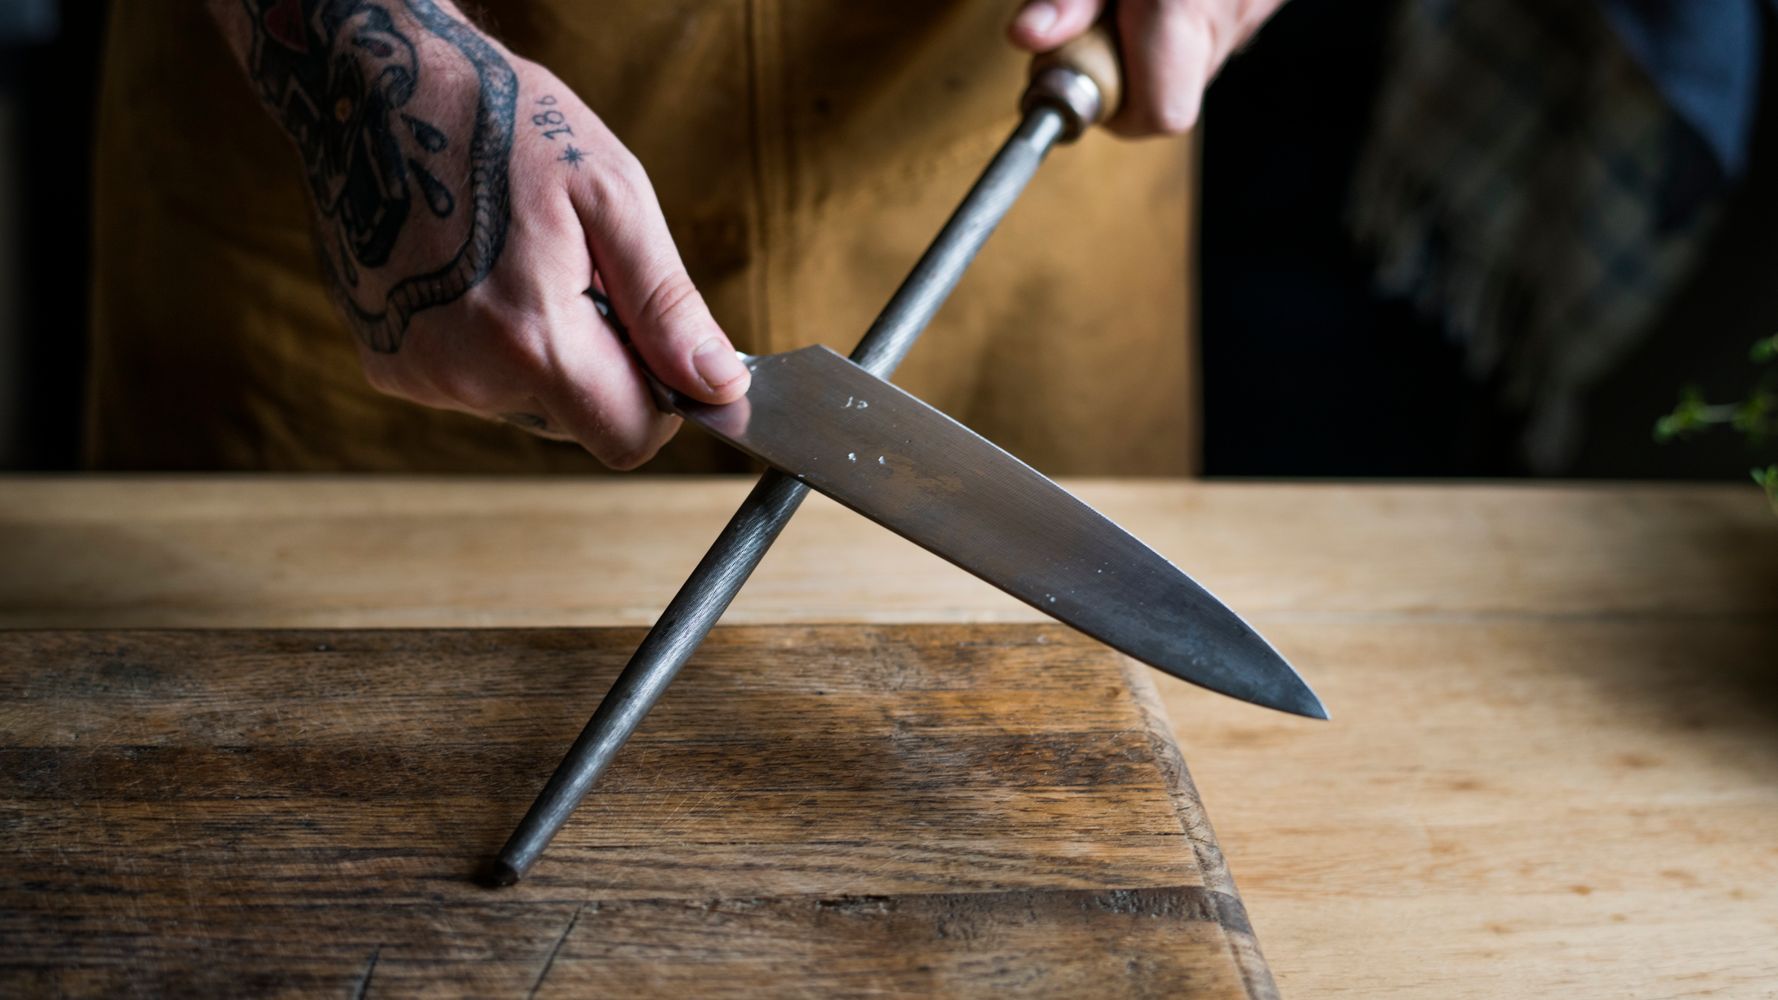 Our longtime favorite chef's knife is sharp, capable, and